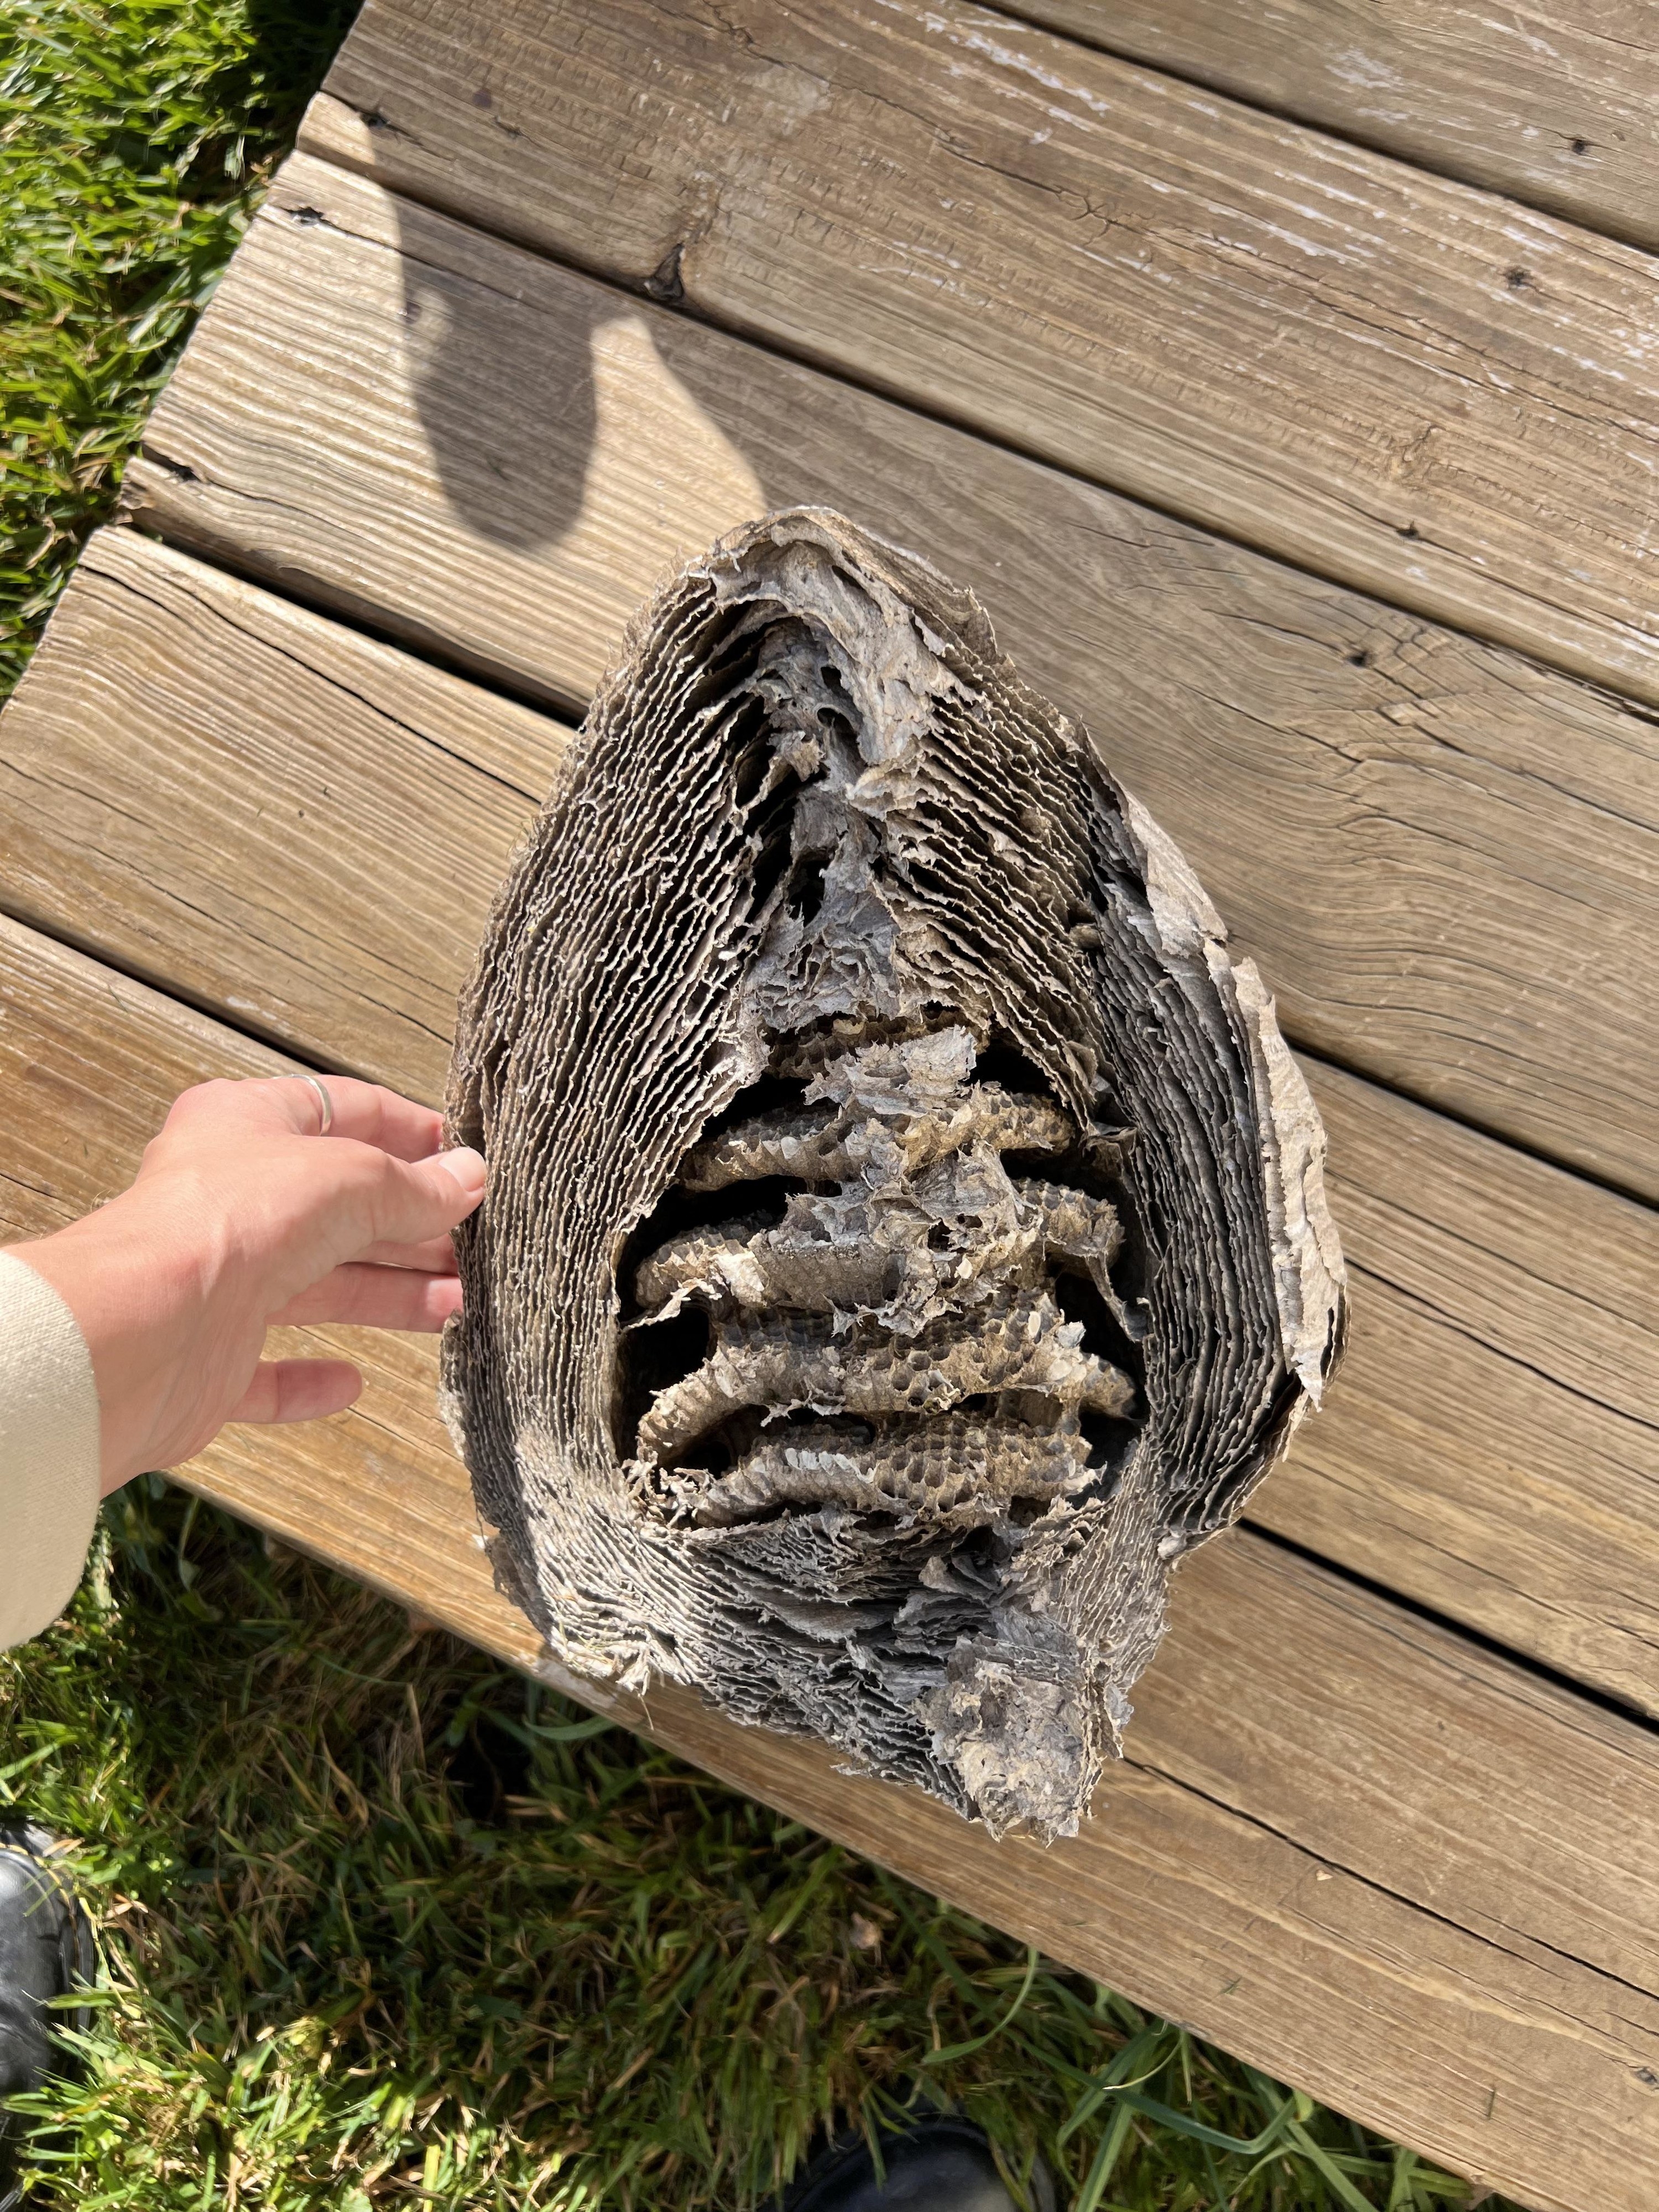 Inside of a wasp nest showing what looks like rows of honeycomb